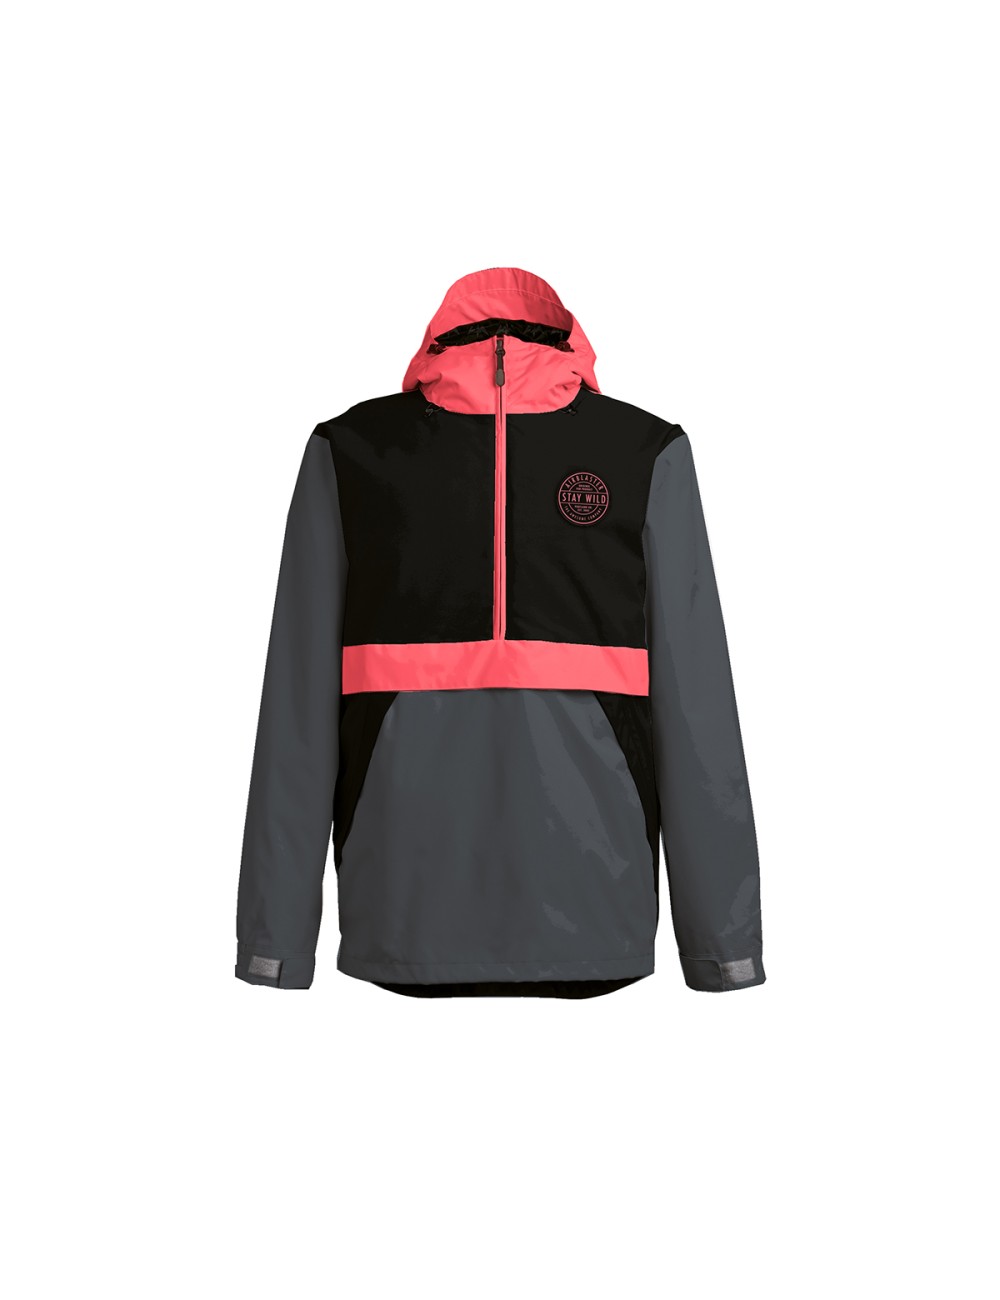 Airblaster Trenchover Jacket - Black / Hot Coral